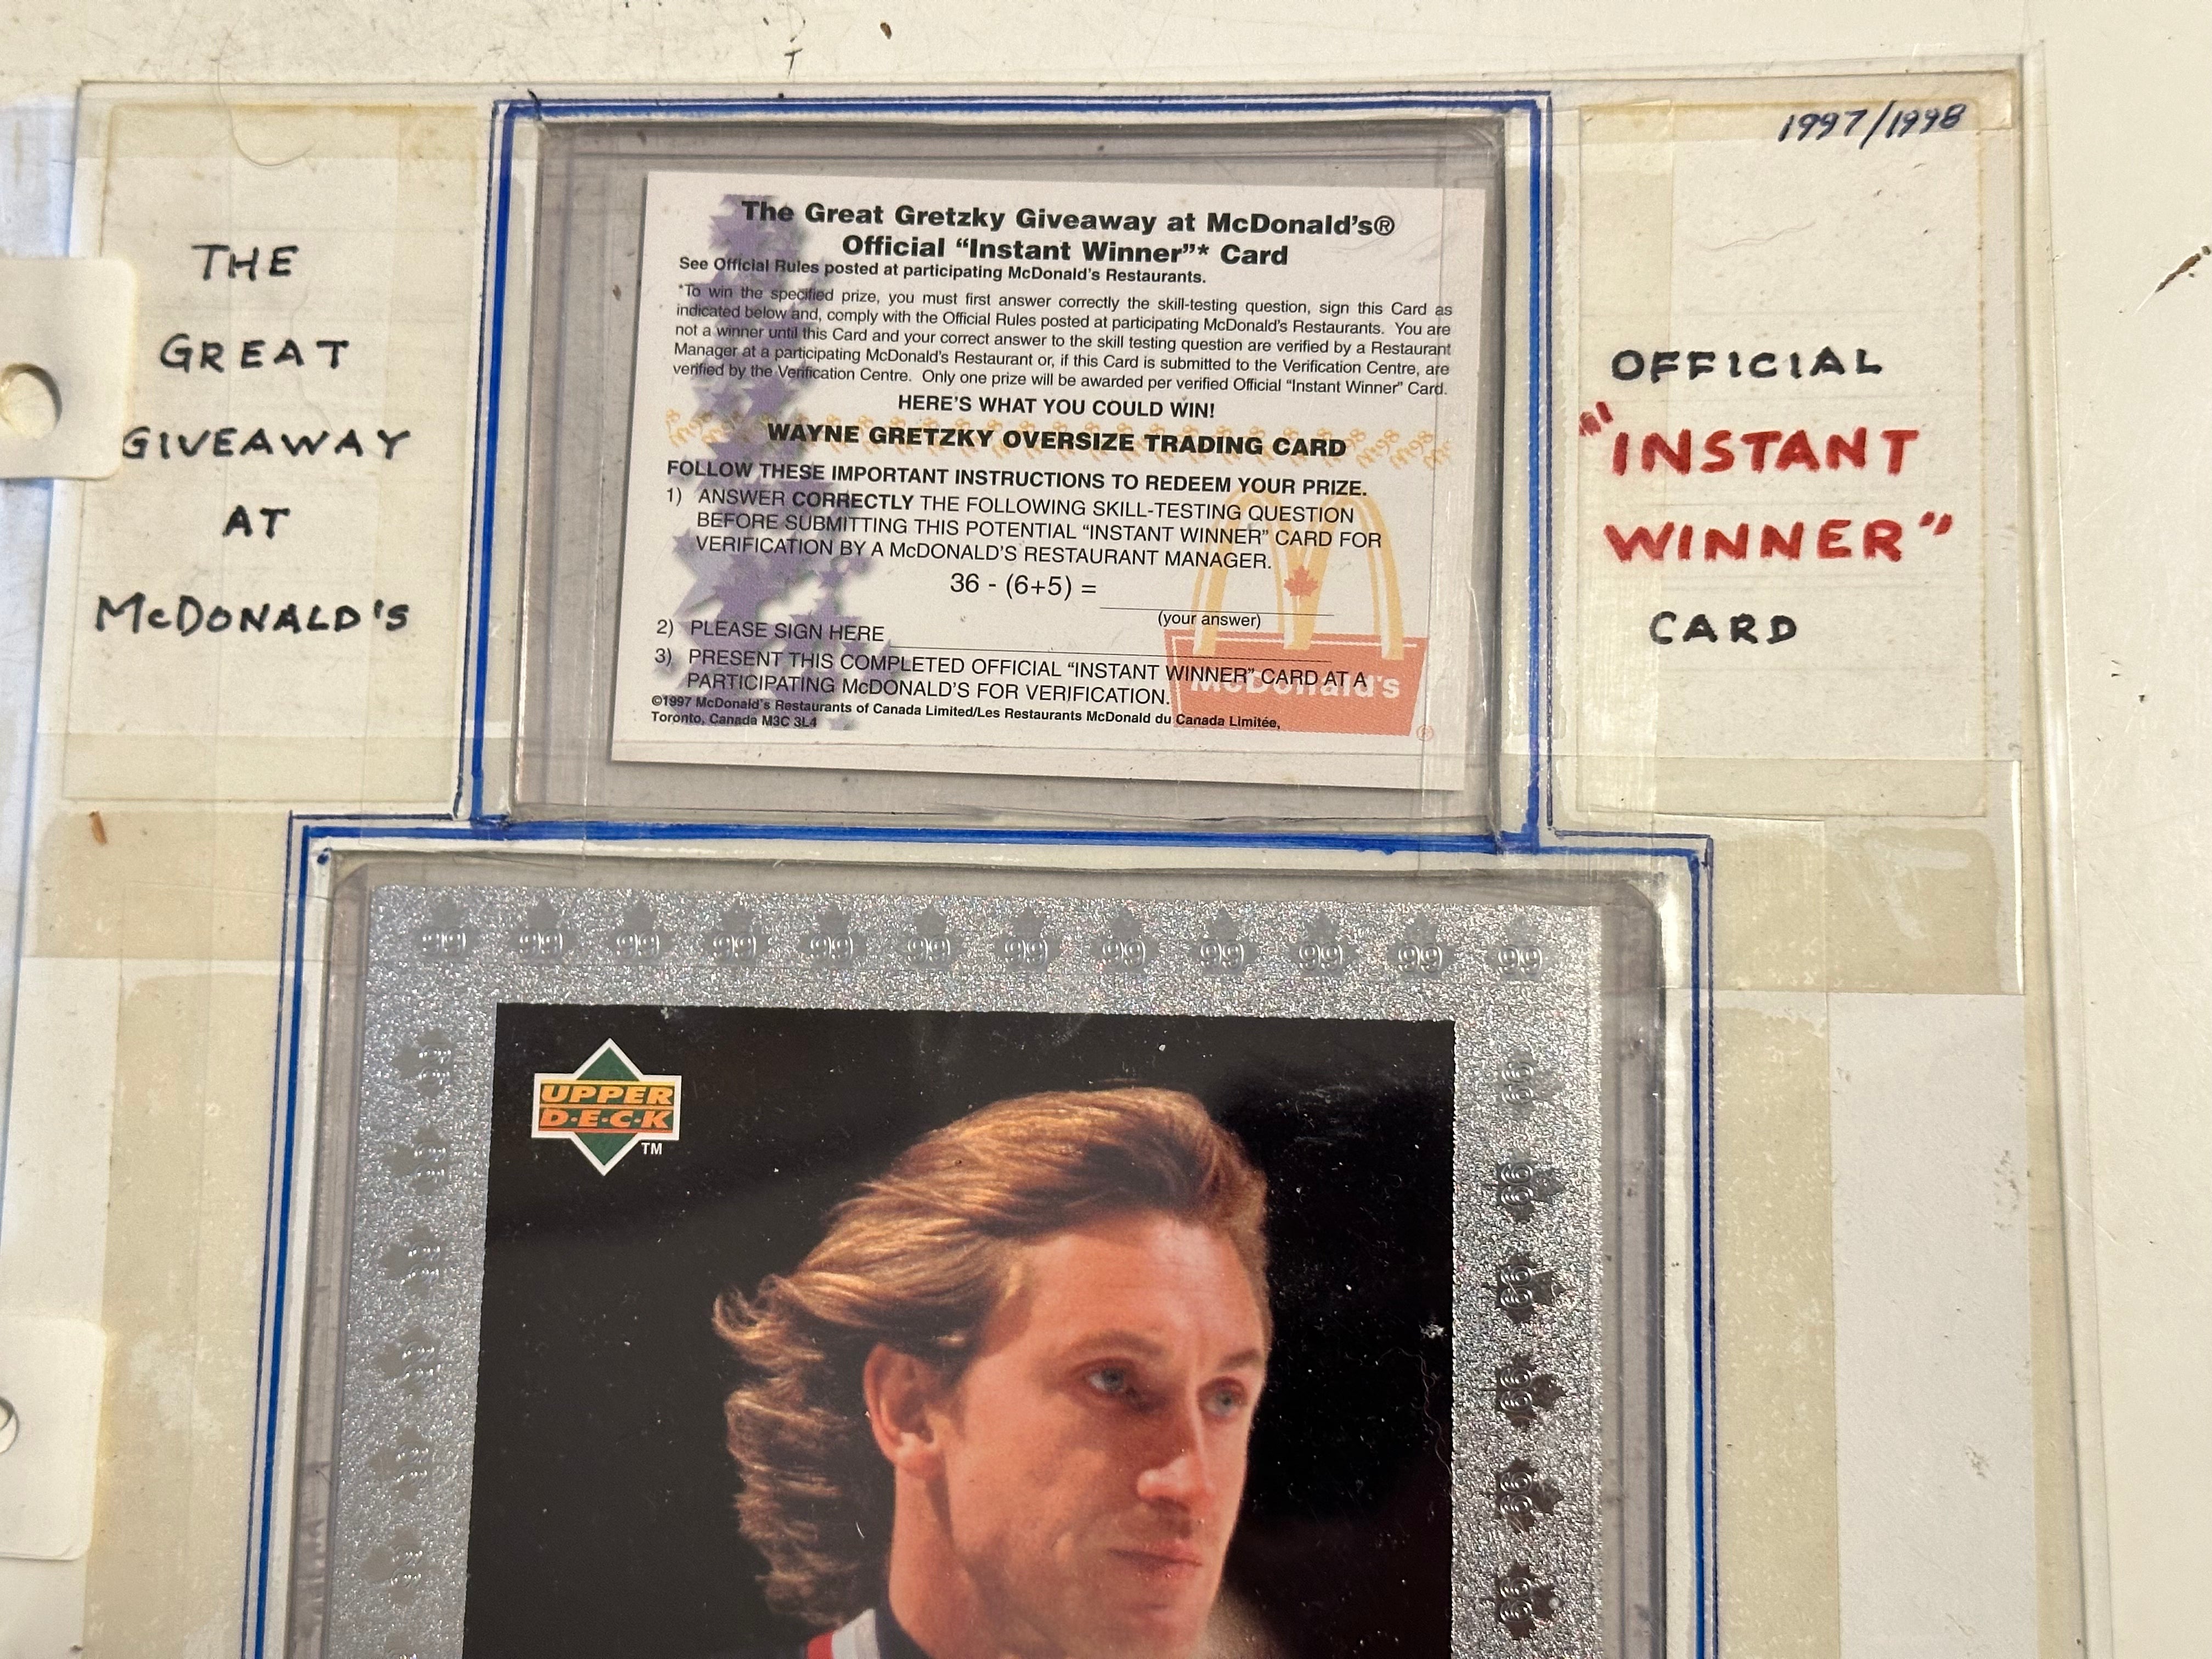 Wayne Gretzky large Mcdonalds instant winner hockey card with redemption card 1997